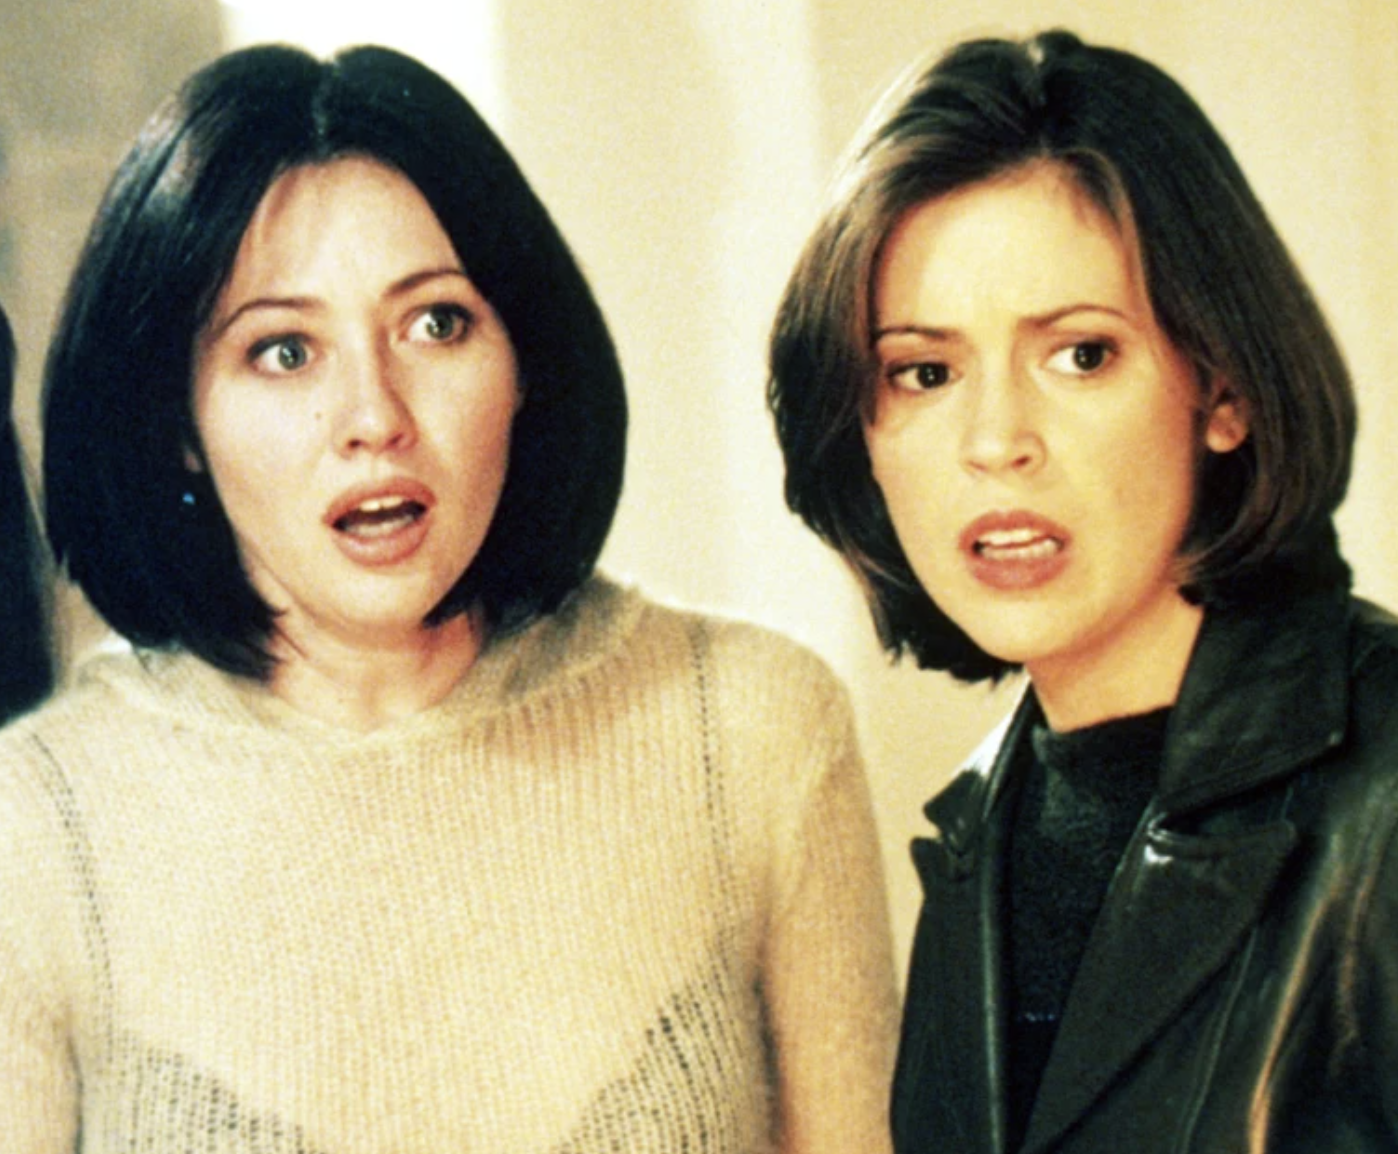 Shannen Doherty and Alyssa Milano looking shocked in a still from Charmed